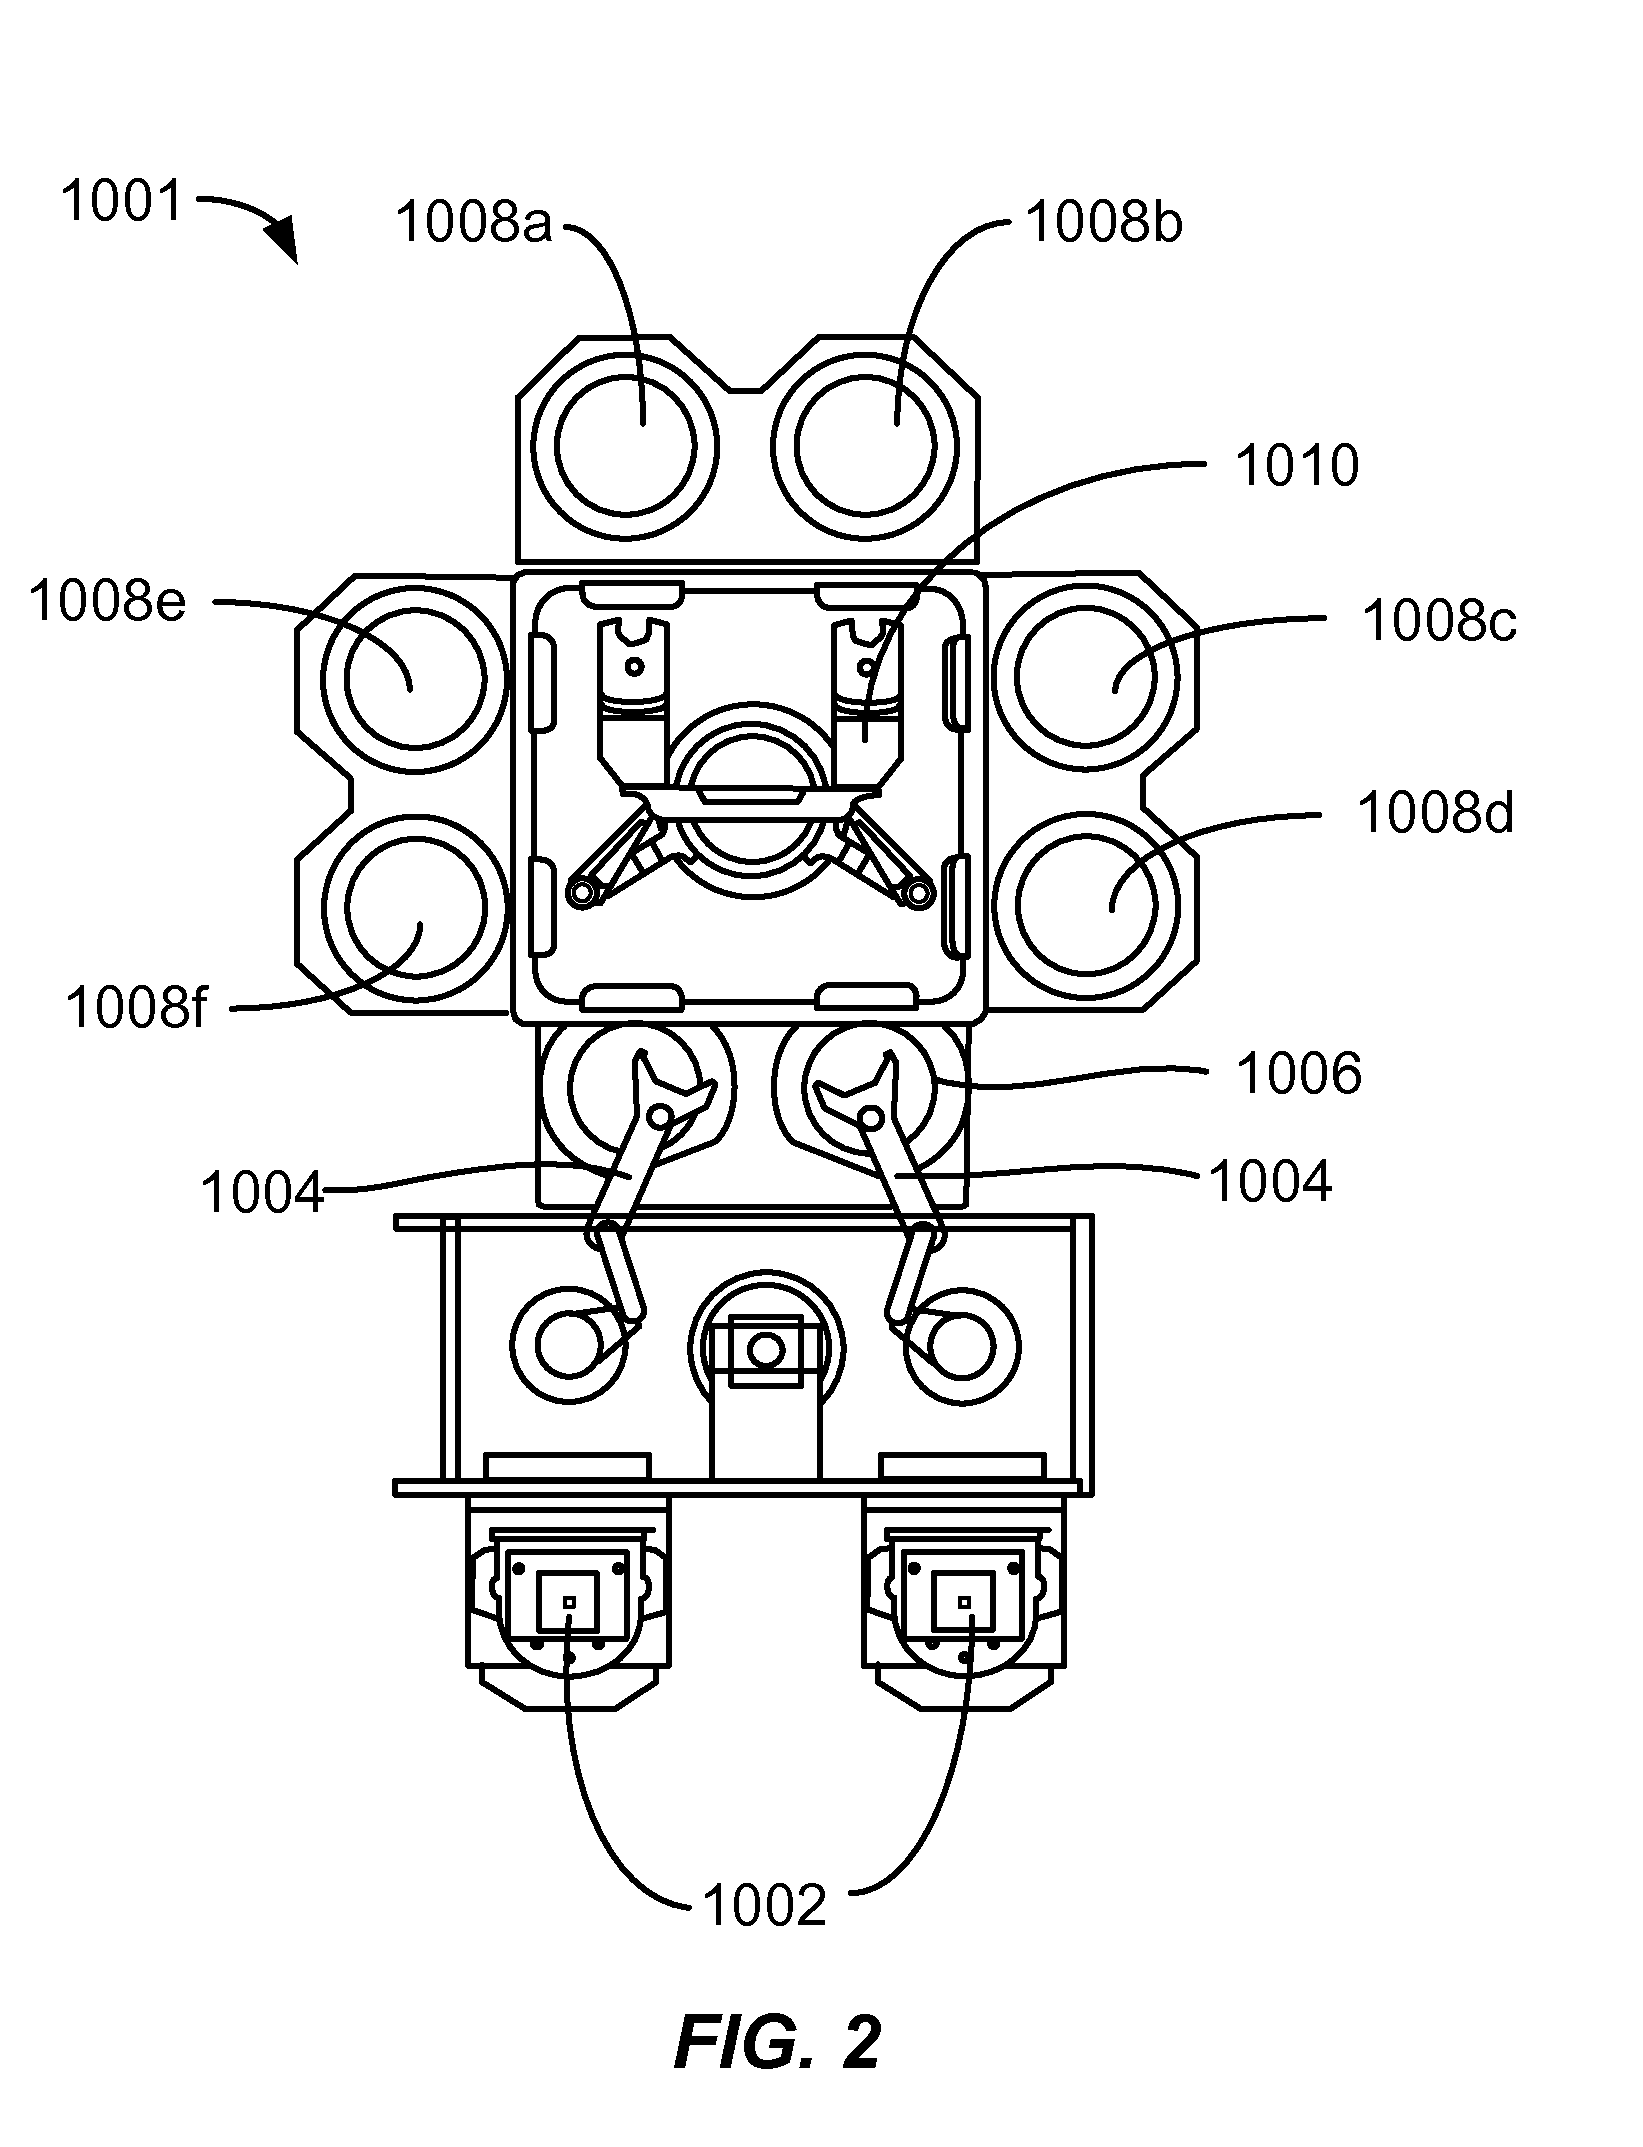 Flowable carbon for semiconductor processing